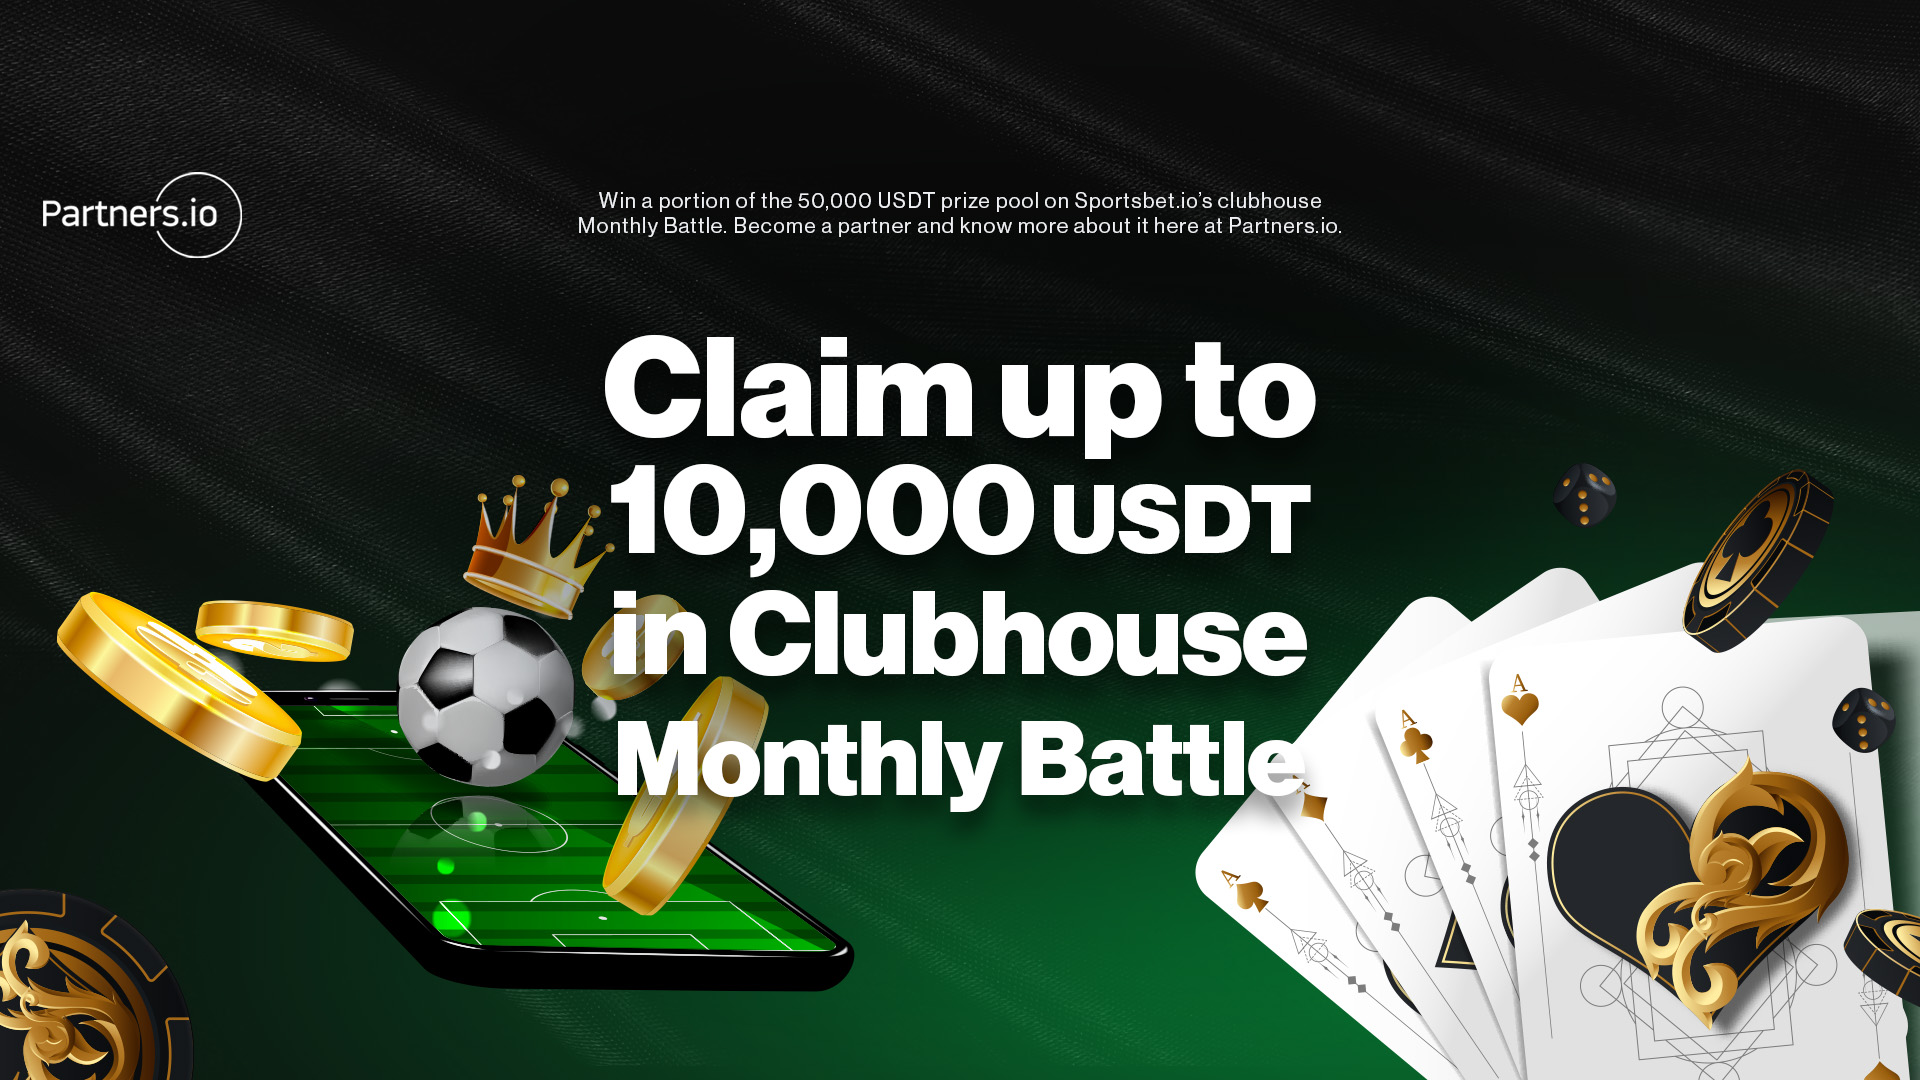 Claim up to 10,000 USDT in the Clubhouse Monthly Battle